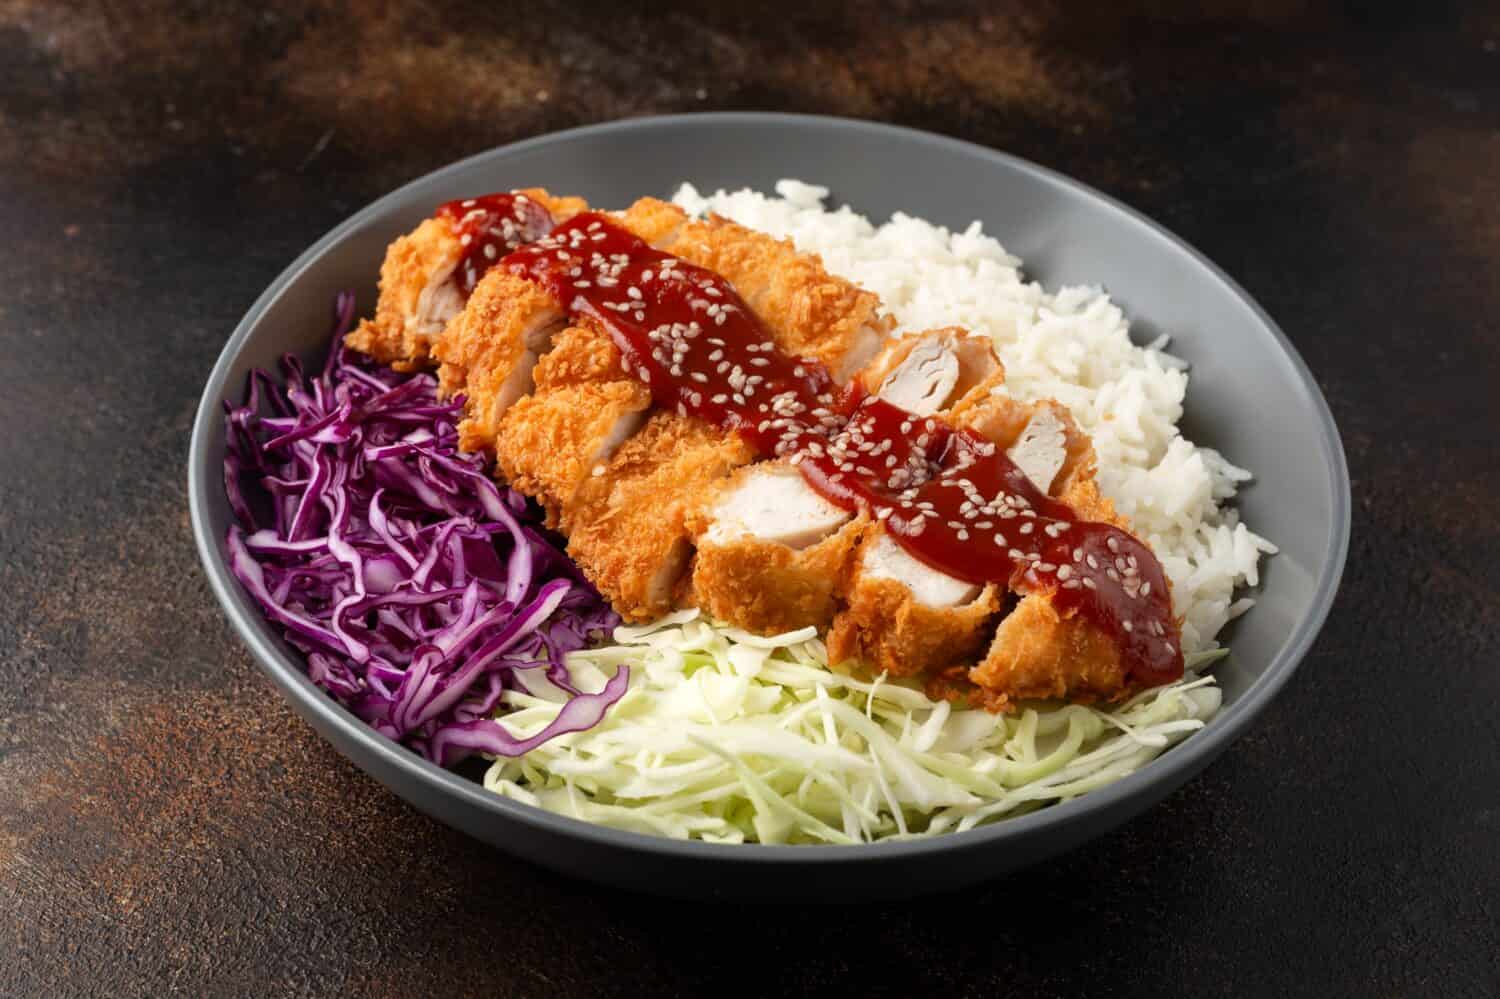 Crispy Katsu chicken with sauce, rice and cabbage.